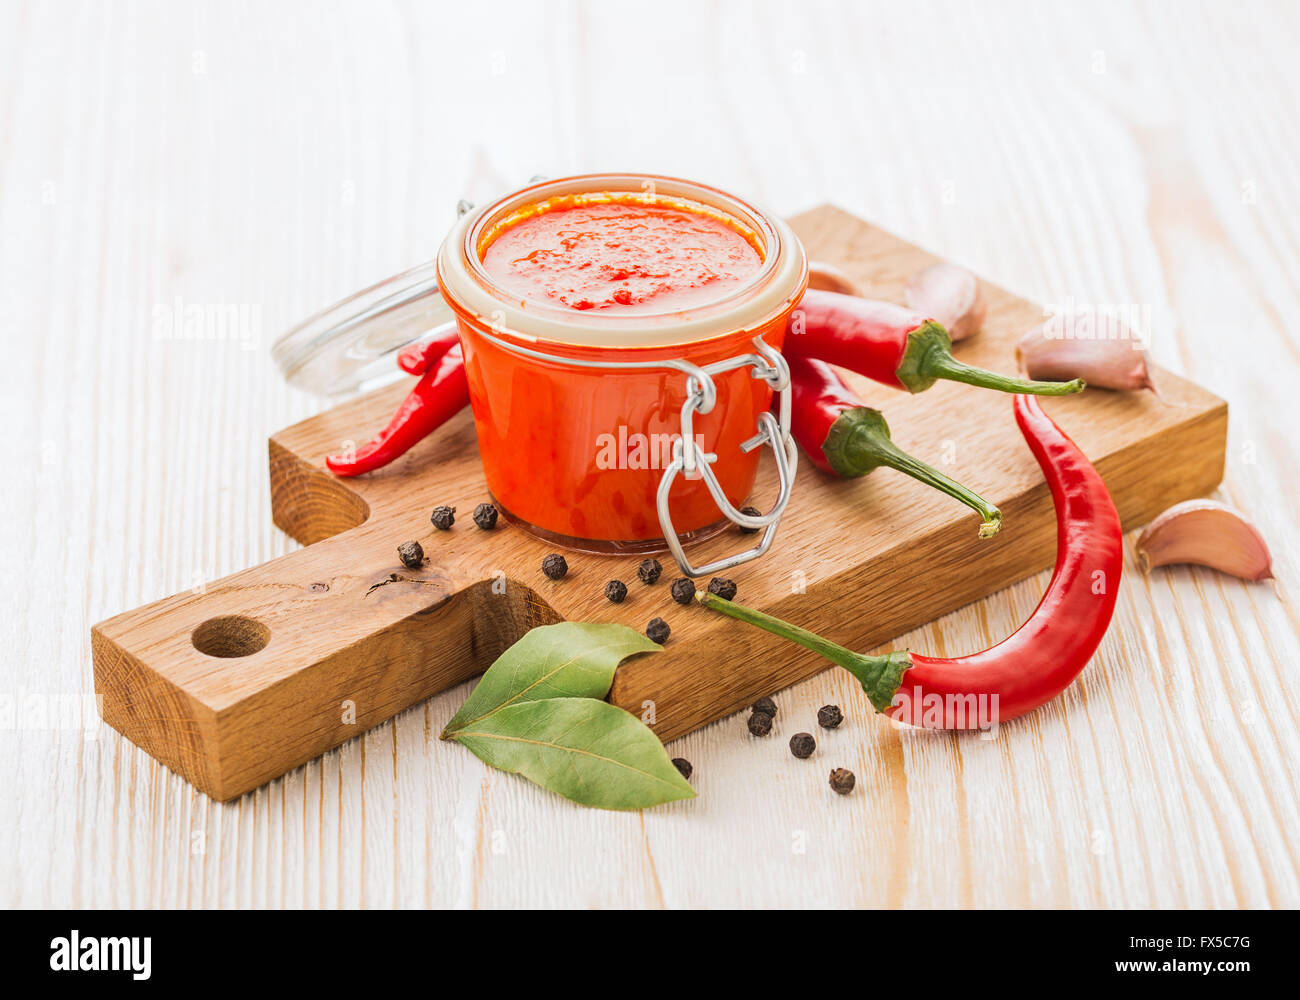 Homemade chili pepper hot sauce with ingredients Stock Photo